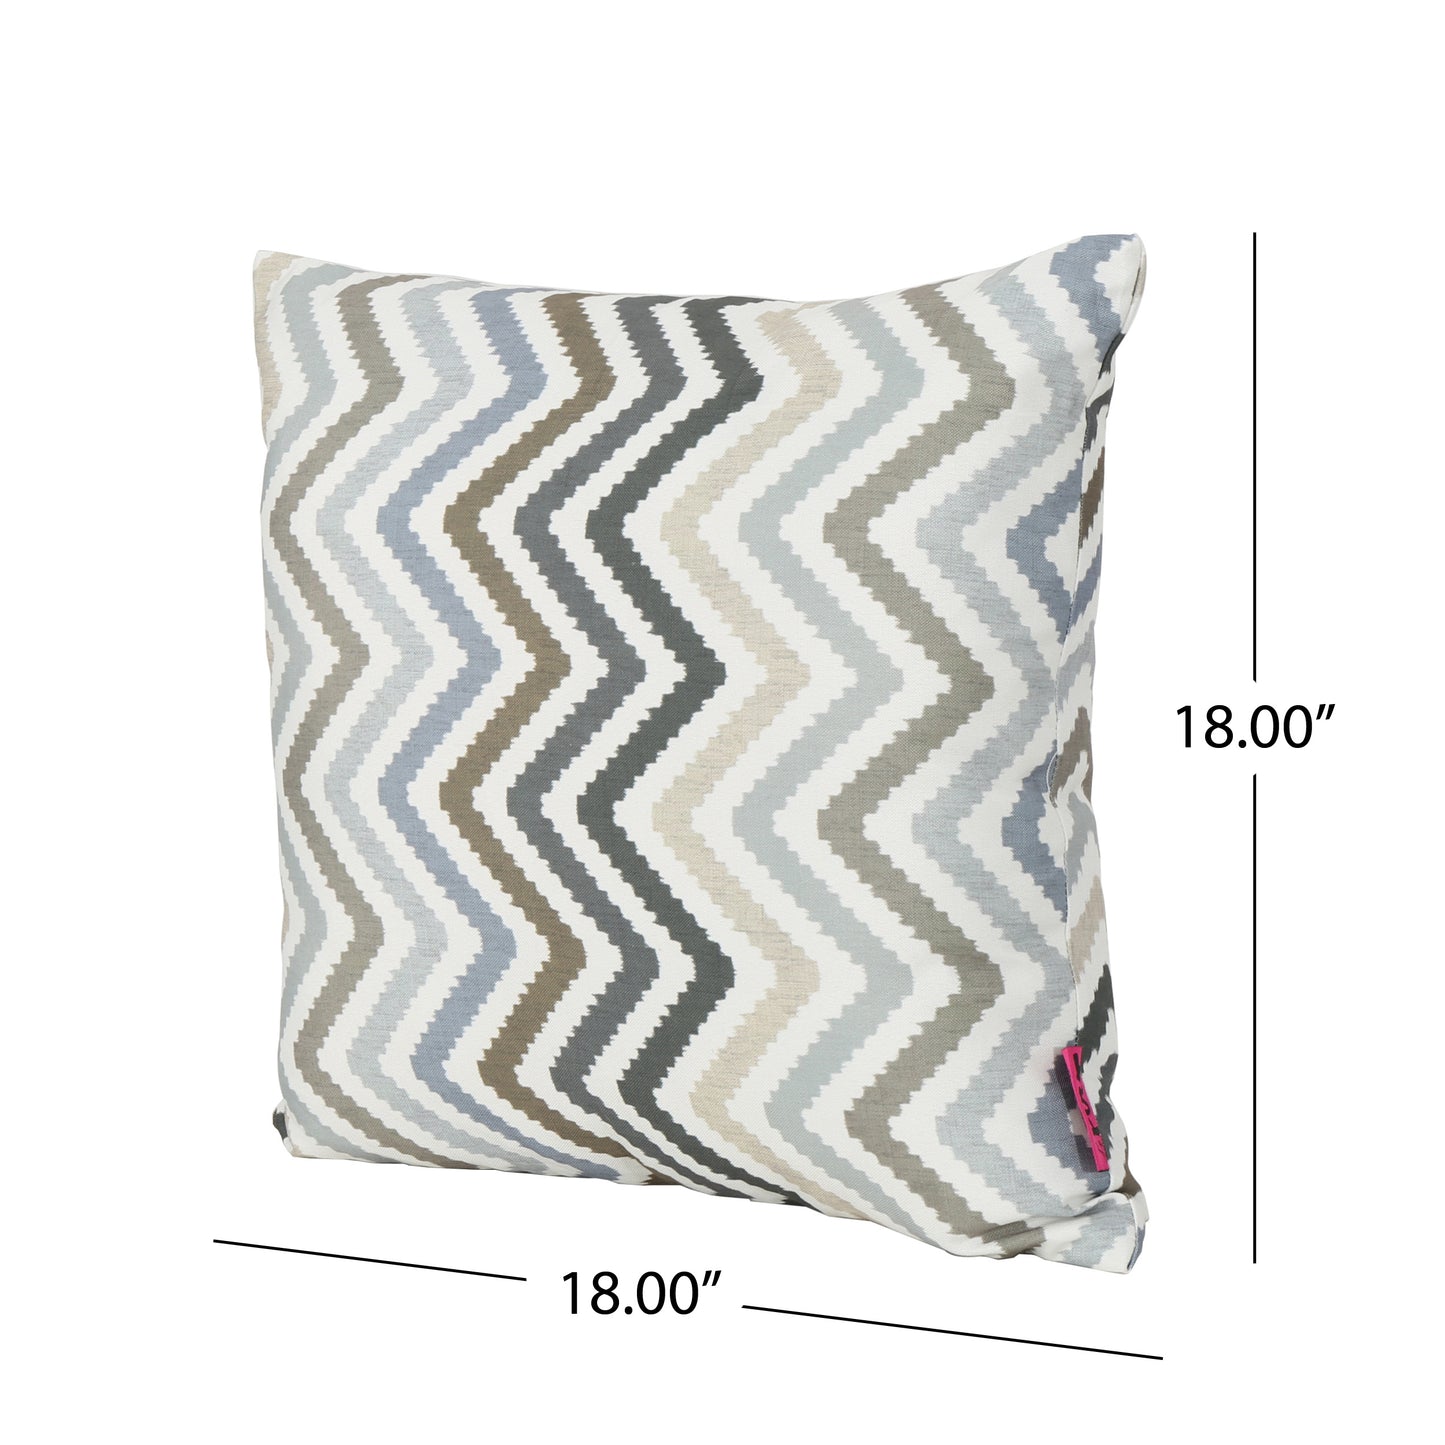 Kimpton Outdoor Zig Zag Striped Water Resistant Tasseled Square and Rectangular Throw Pillows (Set of 4)